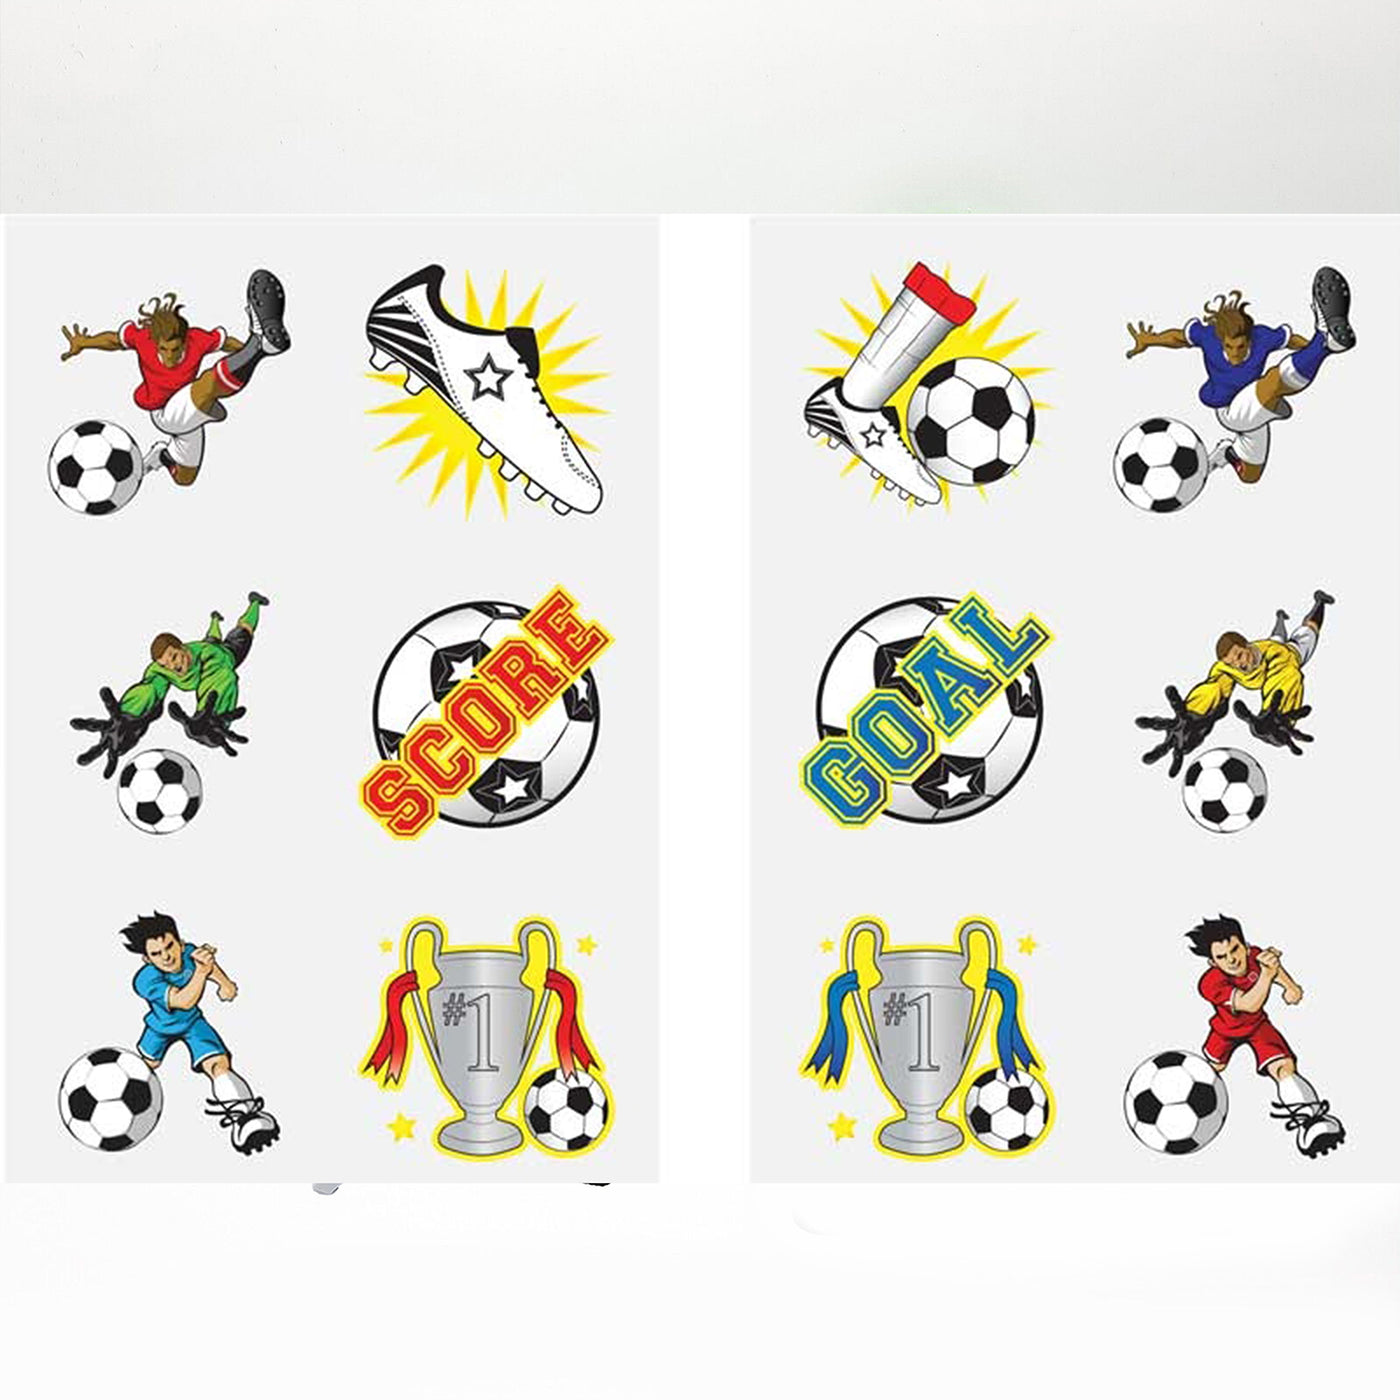 Children's Pre-filled Football Party Bags With Novelty Toys And Sweets.